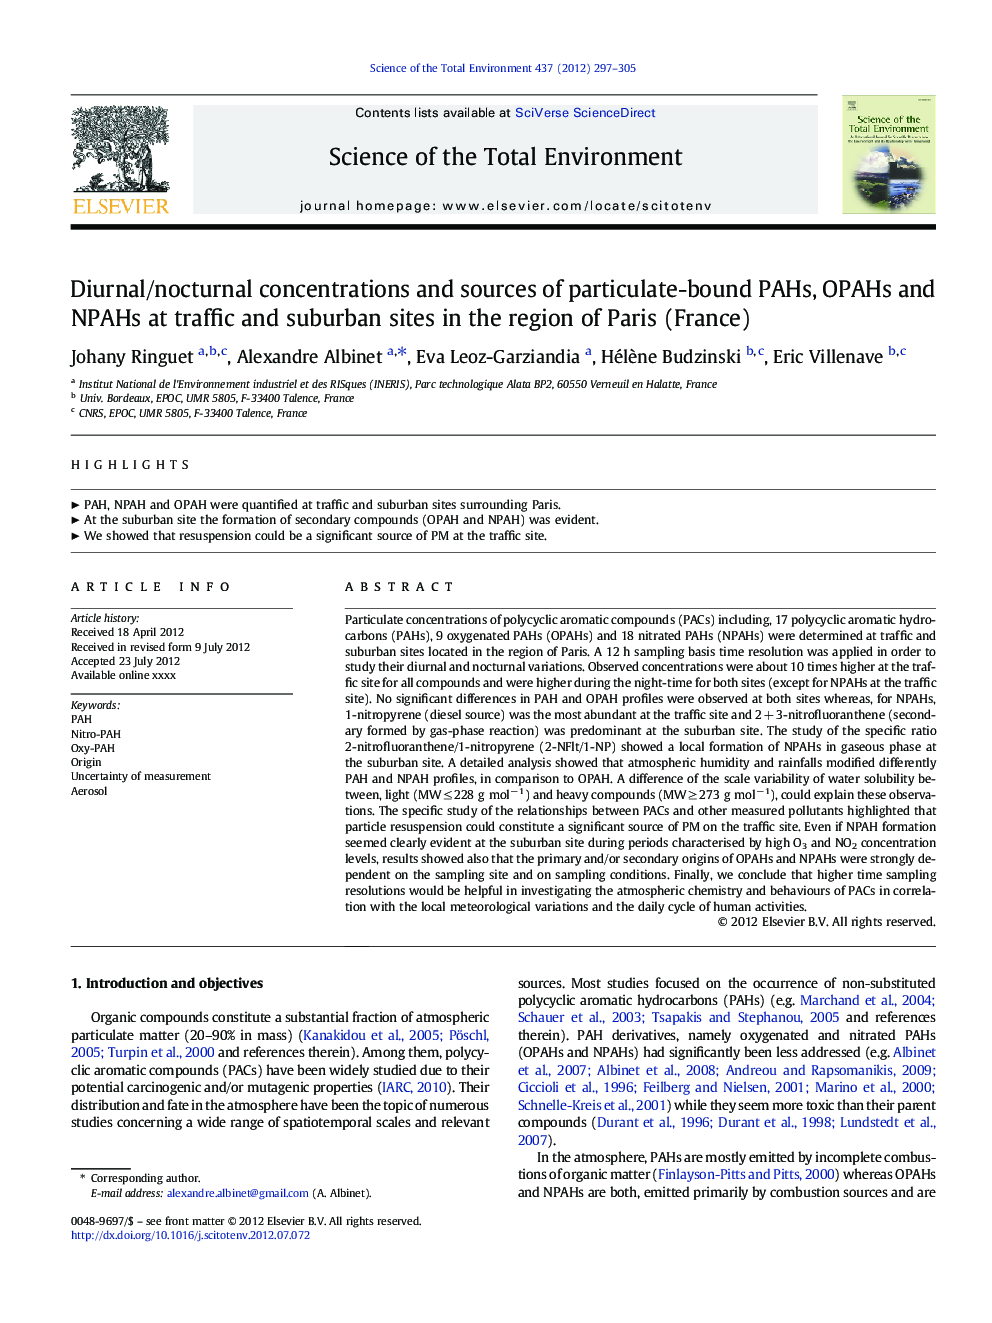 Diurnal/nocturnal concentrations and sources of particulate-bound PAHs, OPAHs and NPAHs at traffic and suburban sites in the region of Paris (France)